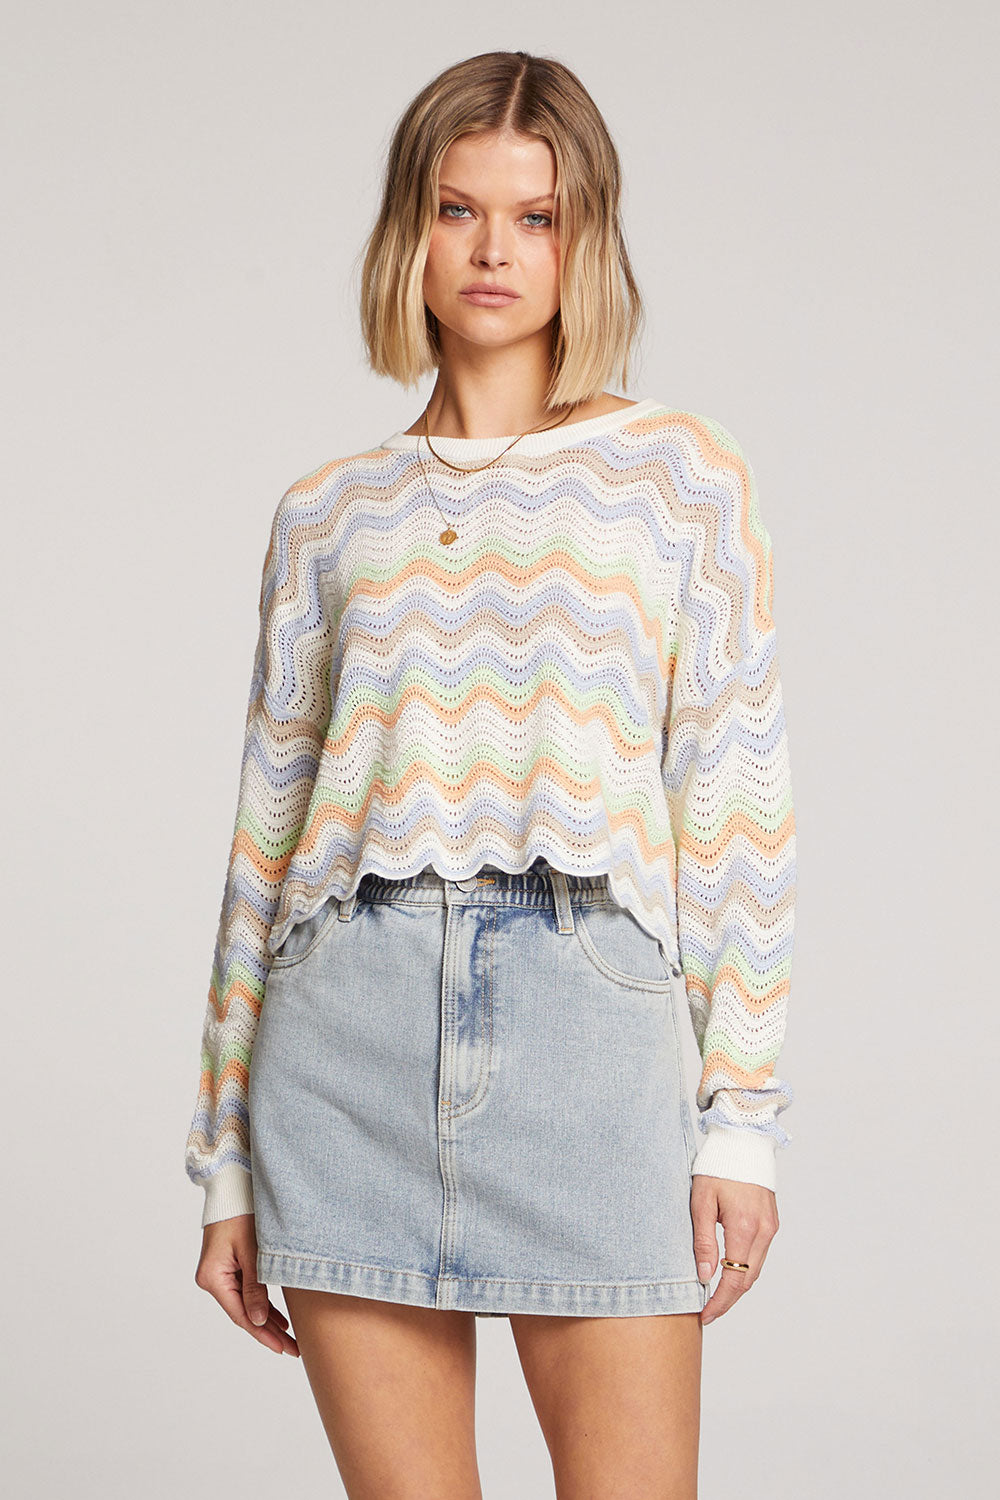 Charmed Sweater - Saltwater Luxe